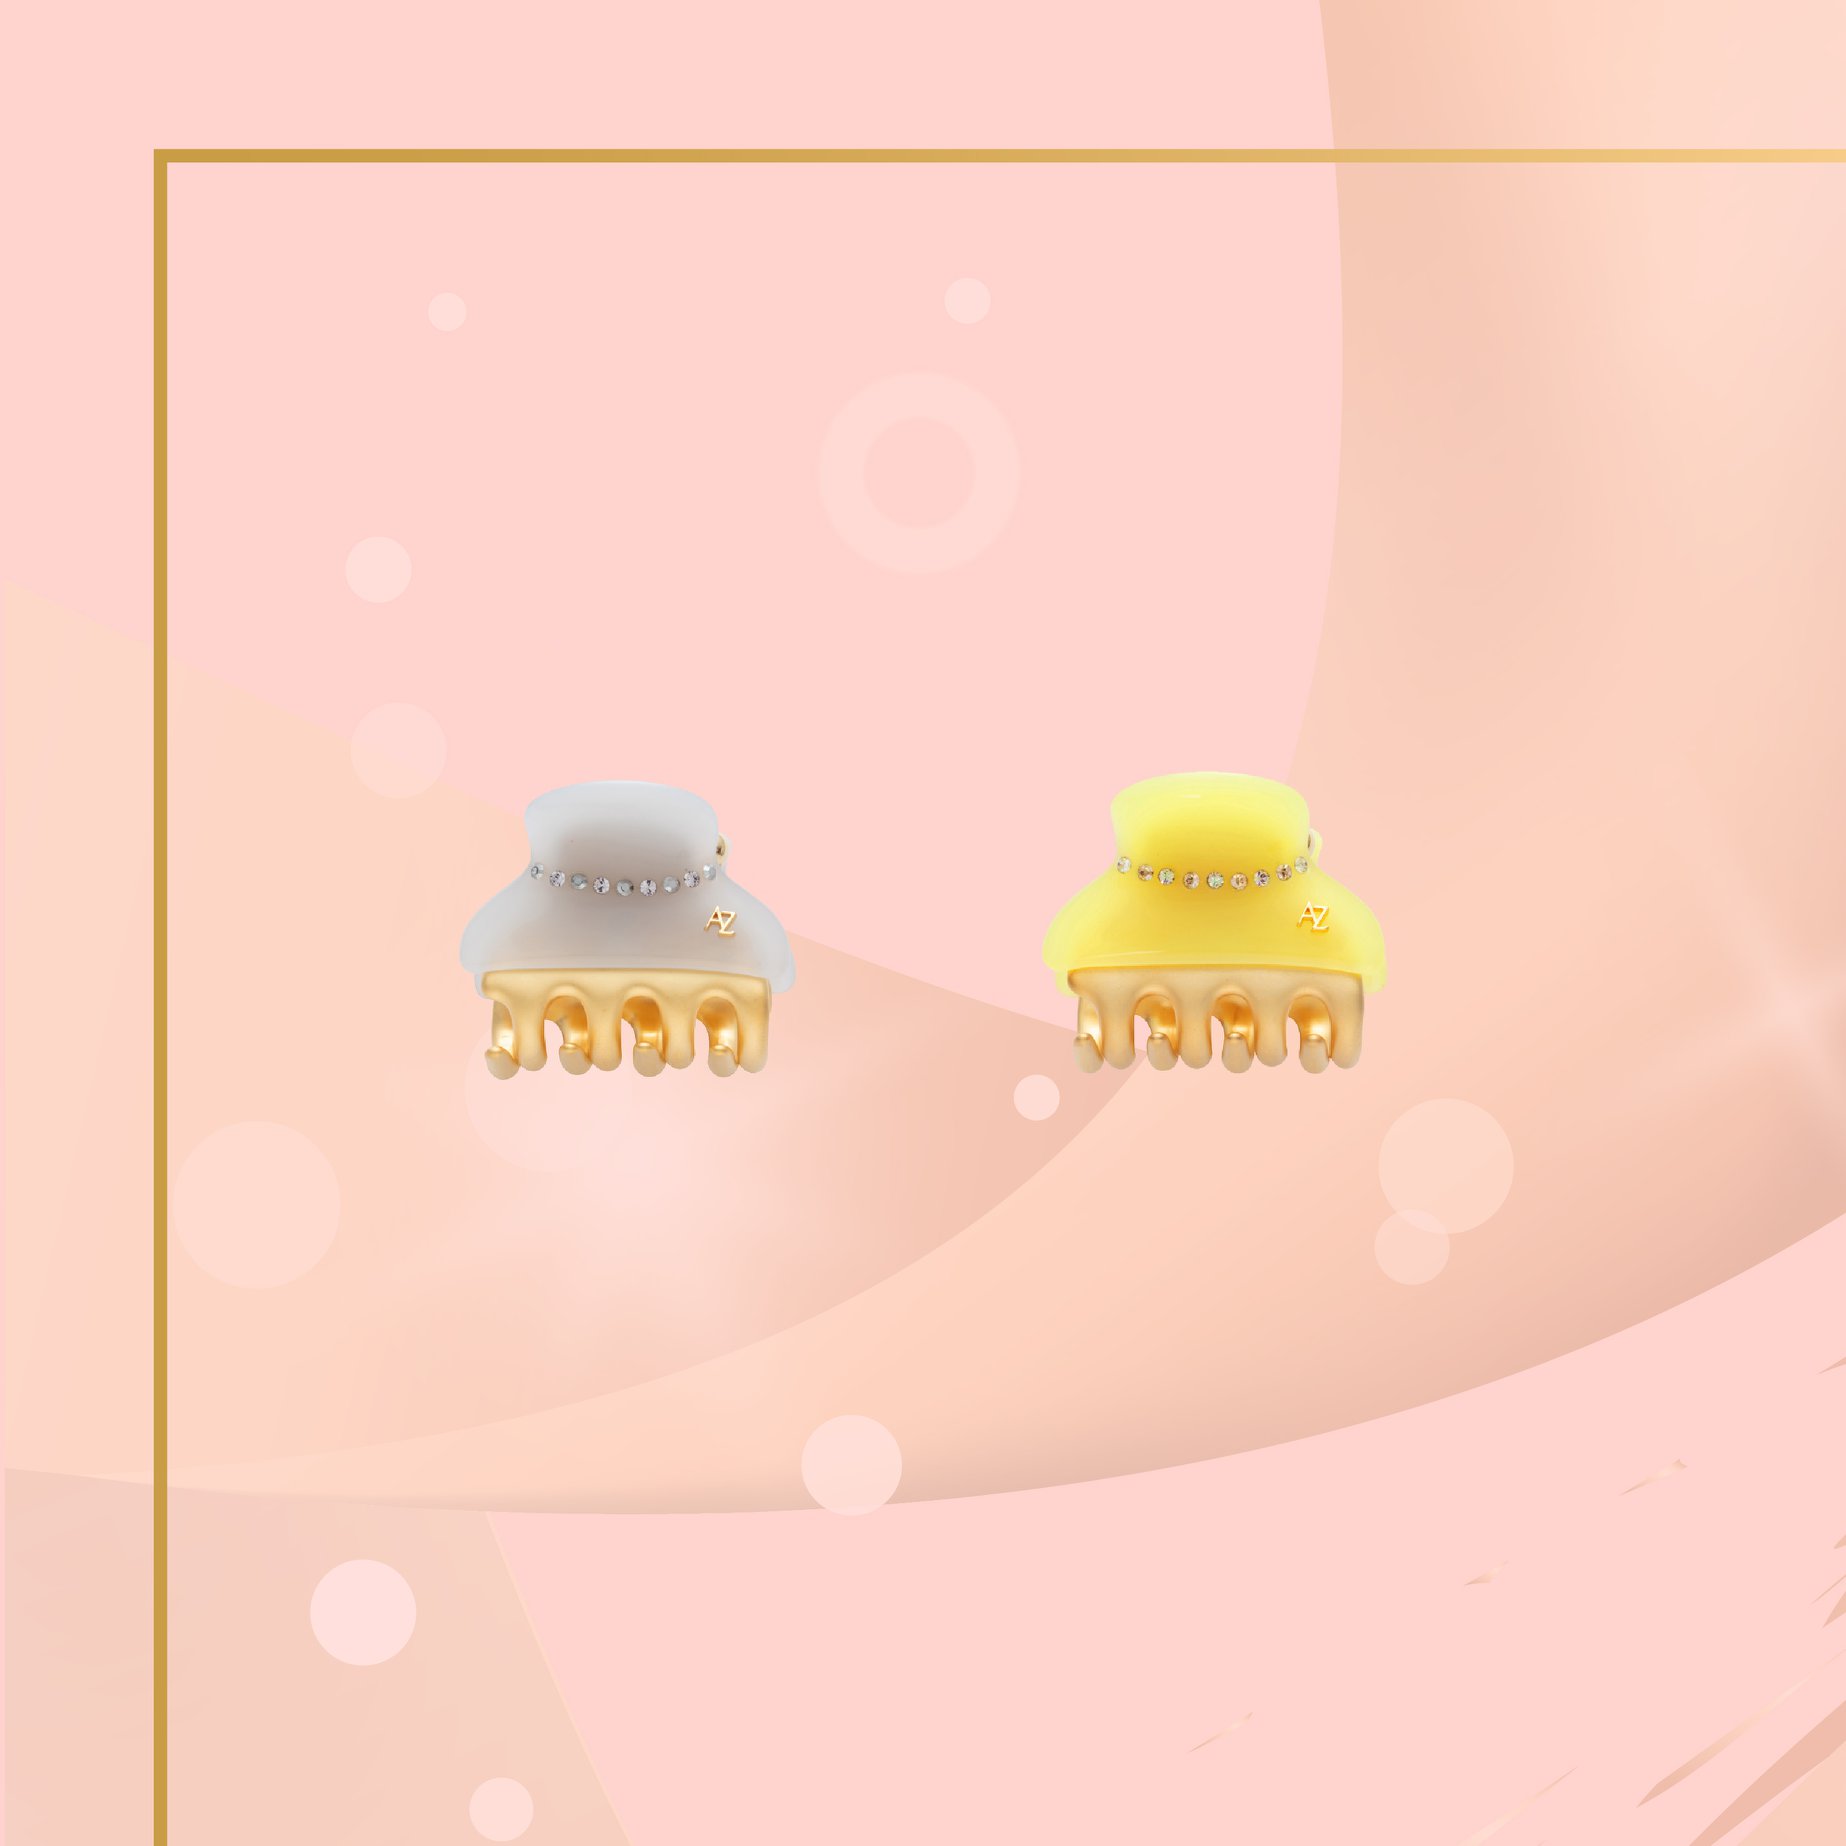 【 BUY 2 GET 1 FREE 】New colors arrived!  Embellished with a playful pop of colorful crystals, style your summer-hair with AZ latest Golden Teeth Crazy Crab Collection! 